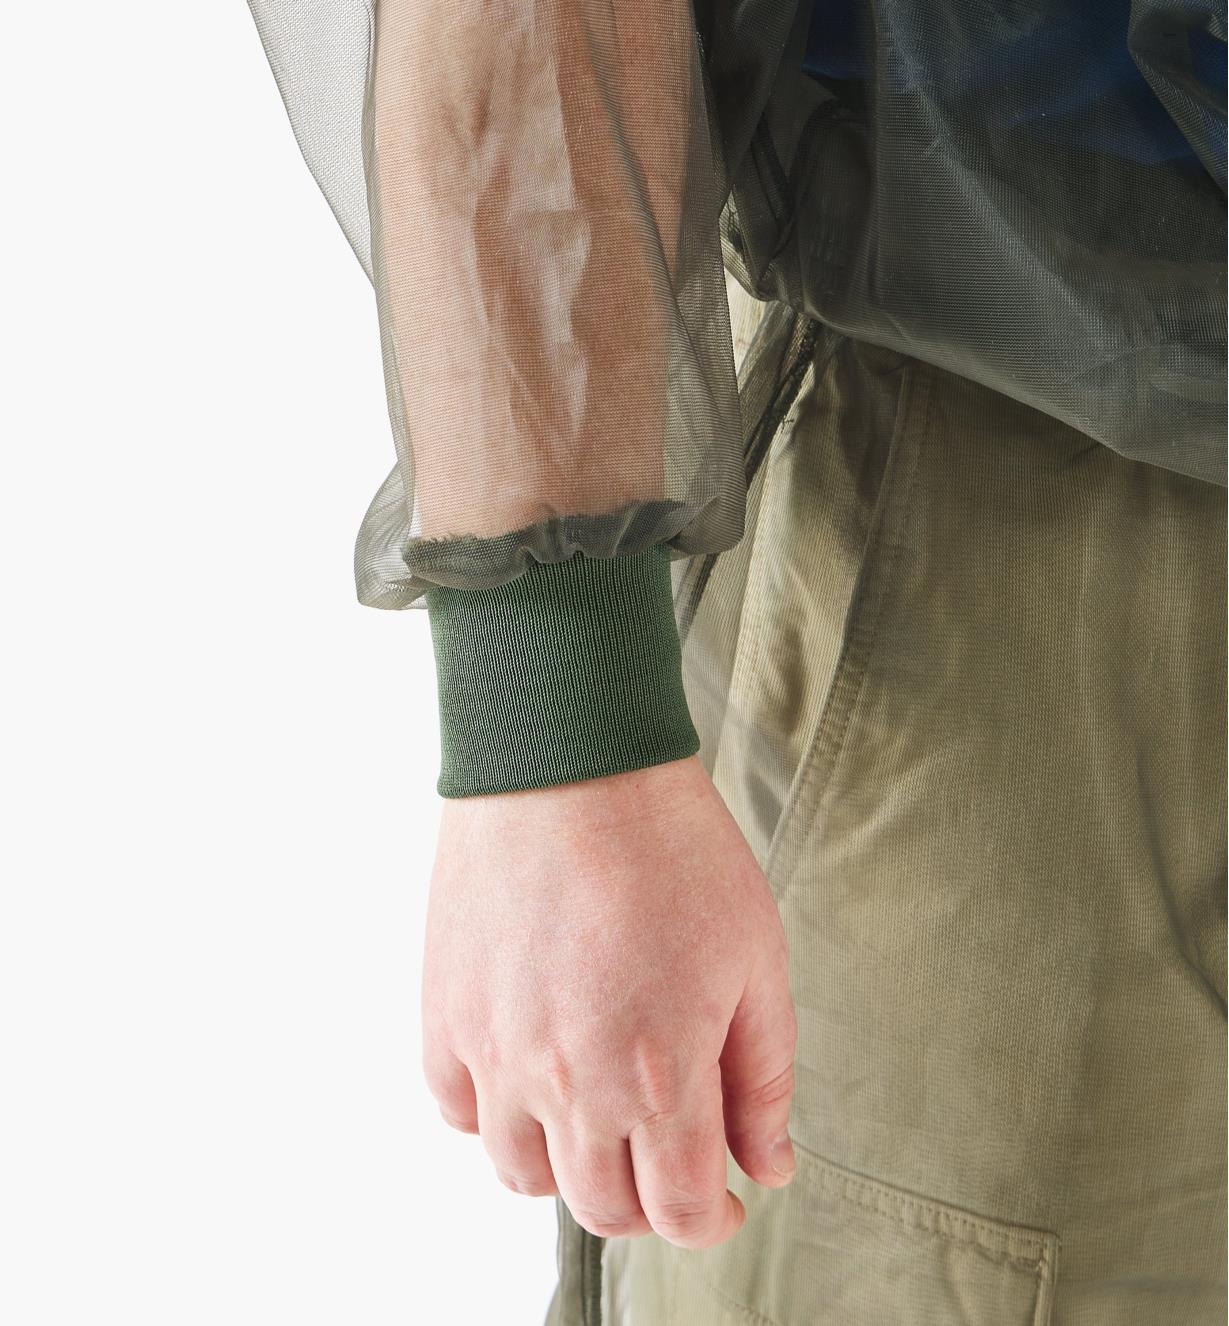 A close-up view of a full-width rib-knit wrist cuff on a hooded bug-protection shirt worn by a man